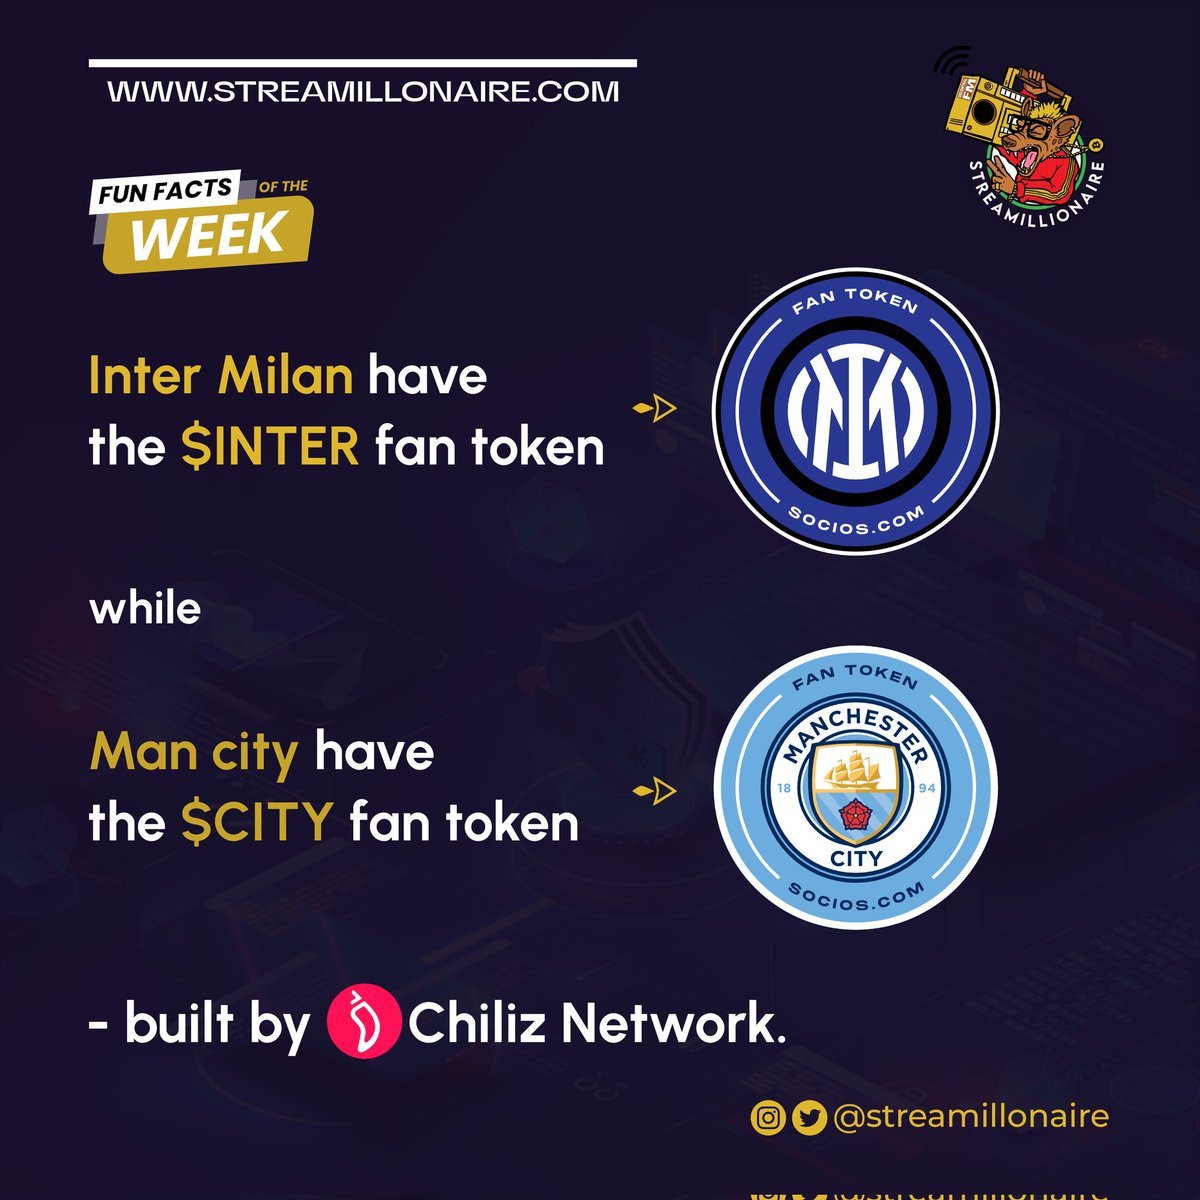 We're excited this history is being made in our time with #intermilan and #mancity 

#streamillonaire #Lagoslabs #championsleague2023 #championsleague #manchestercityfc #mancityfc #intermilanfc #cryptonews  #blockchainnews